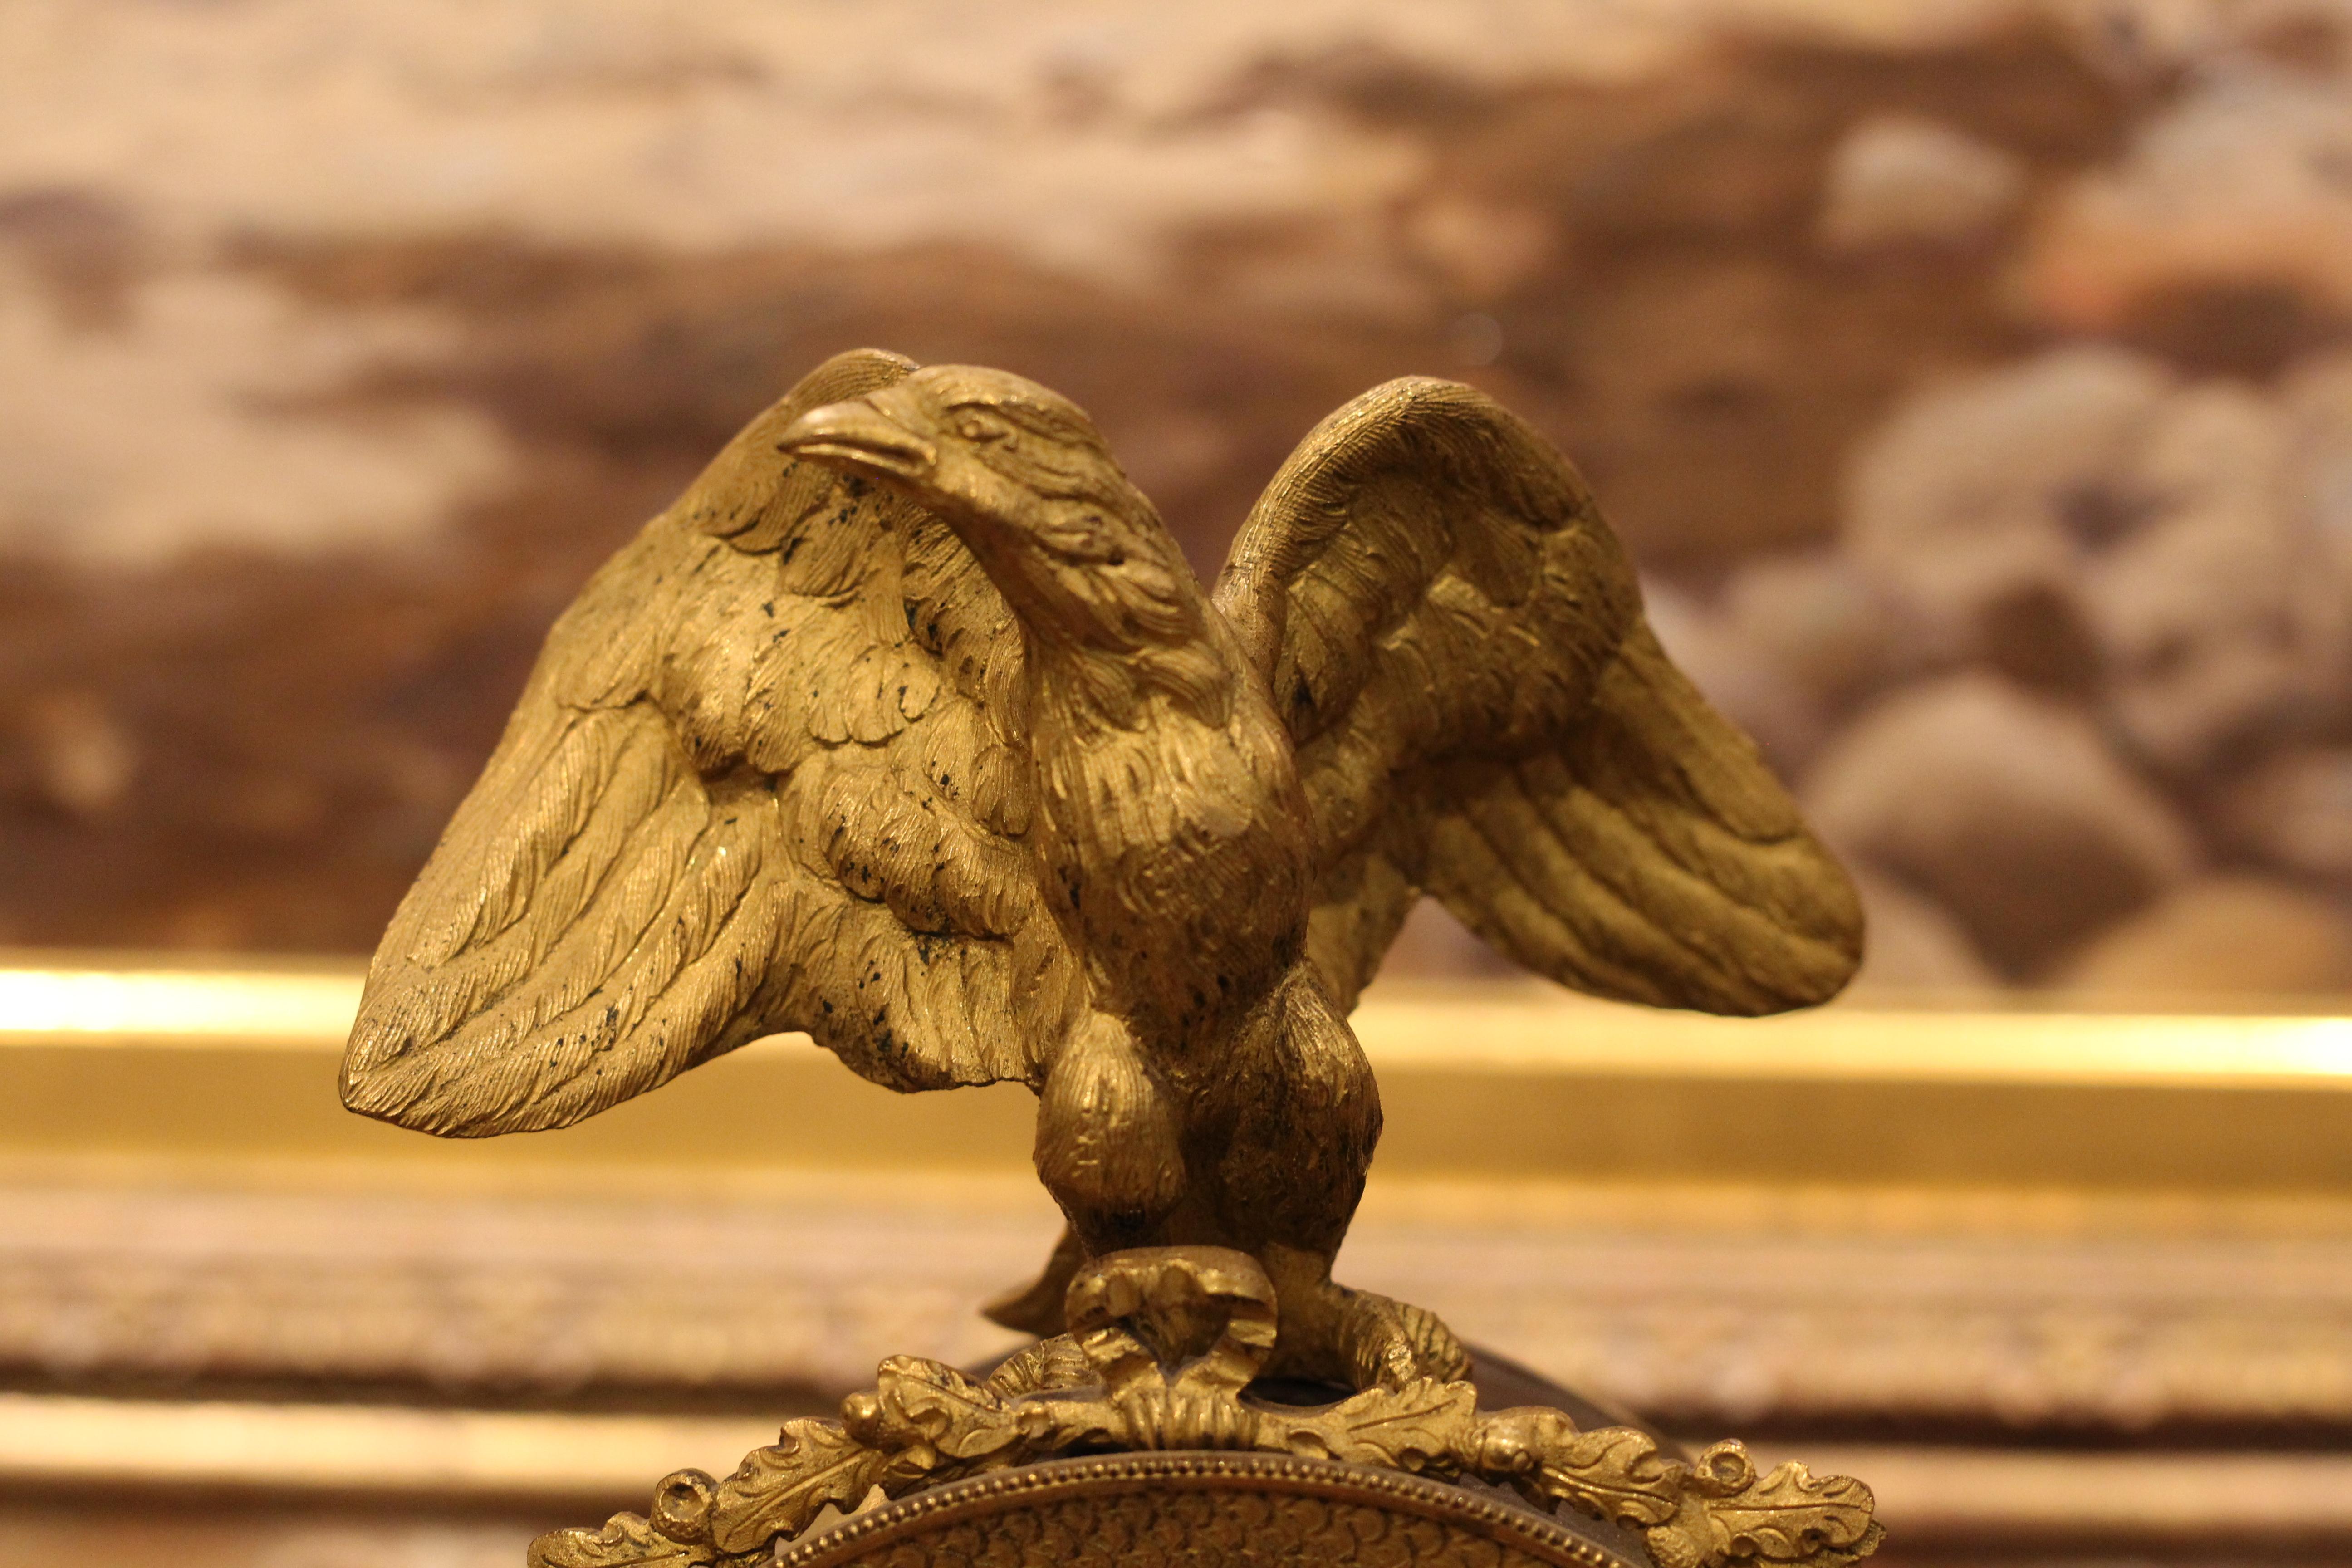 Empire style mantle clock with gilt bronze and bronze adornments of an eagle and cherubs,
circa 1820-1840.